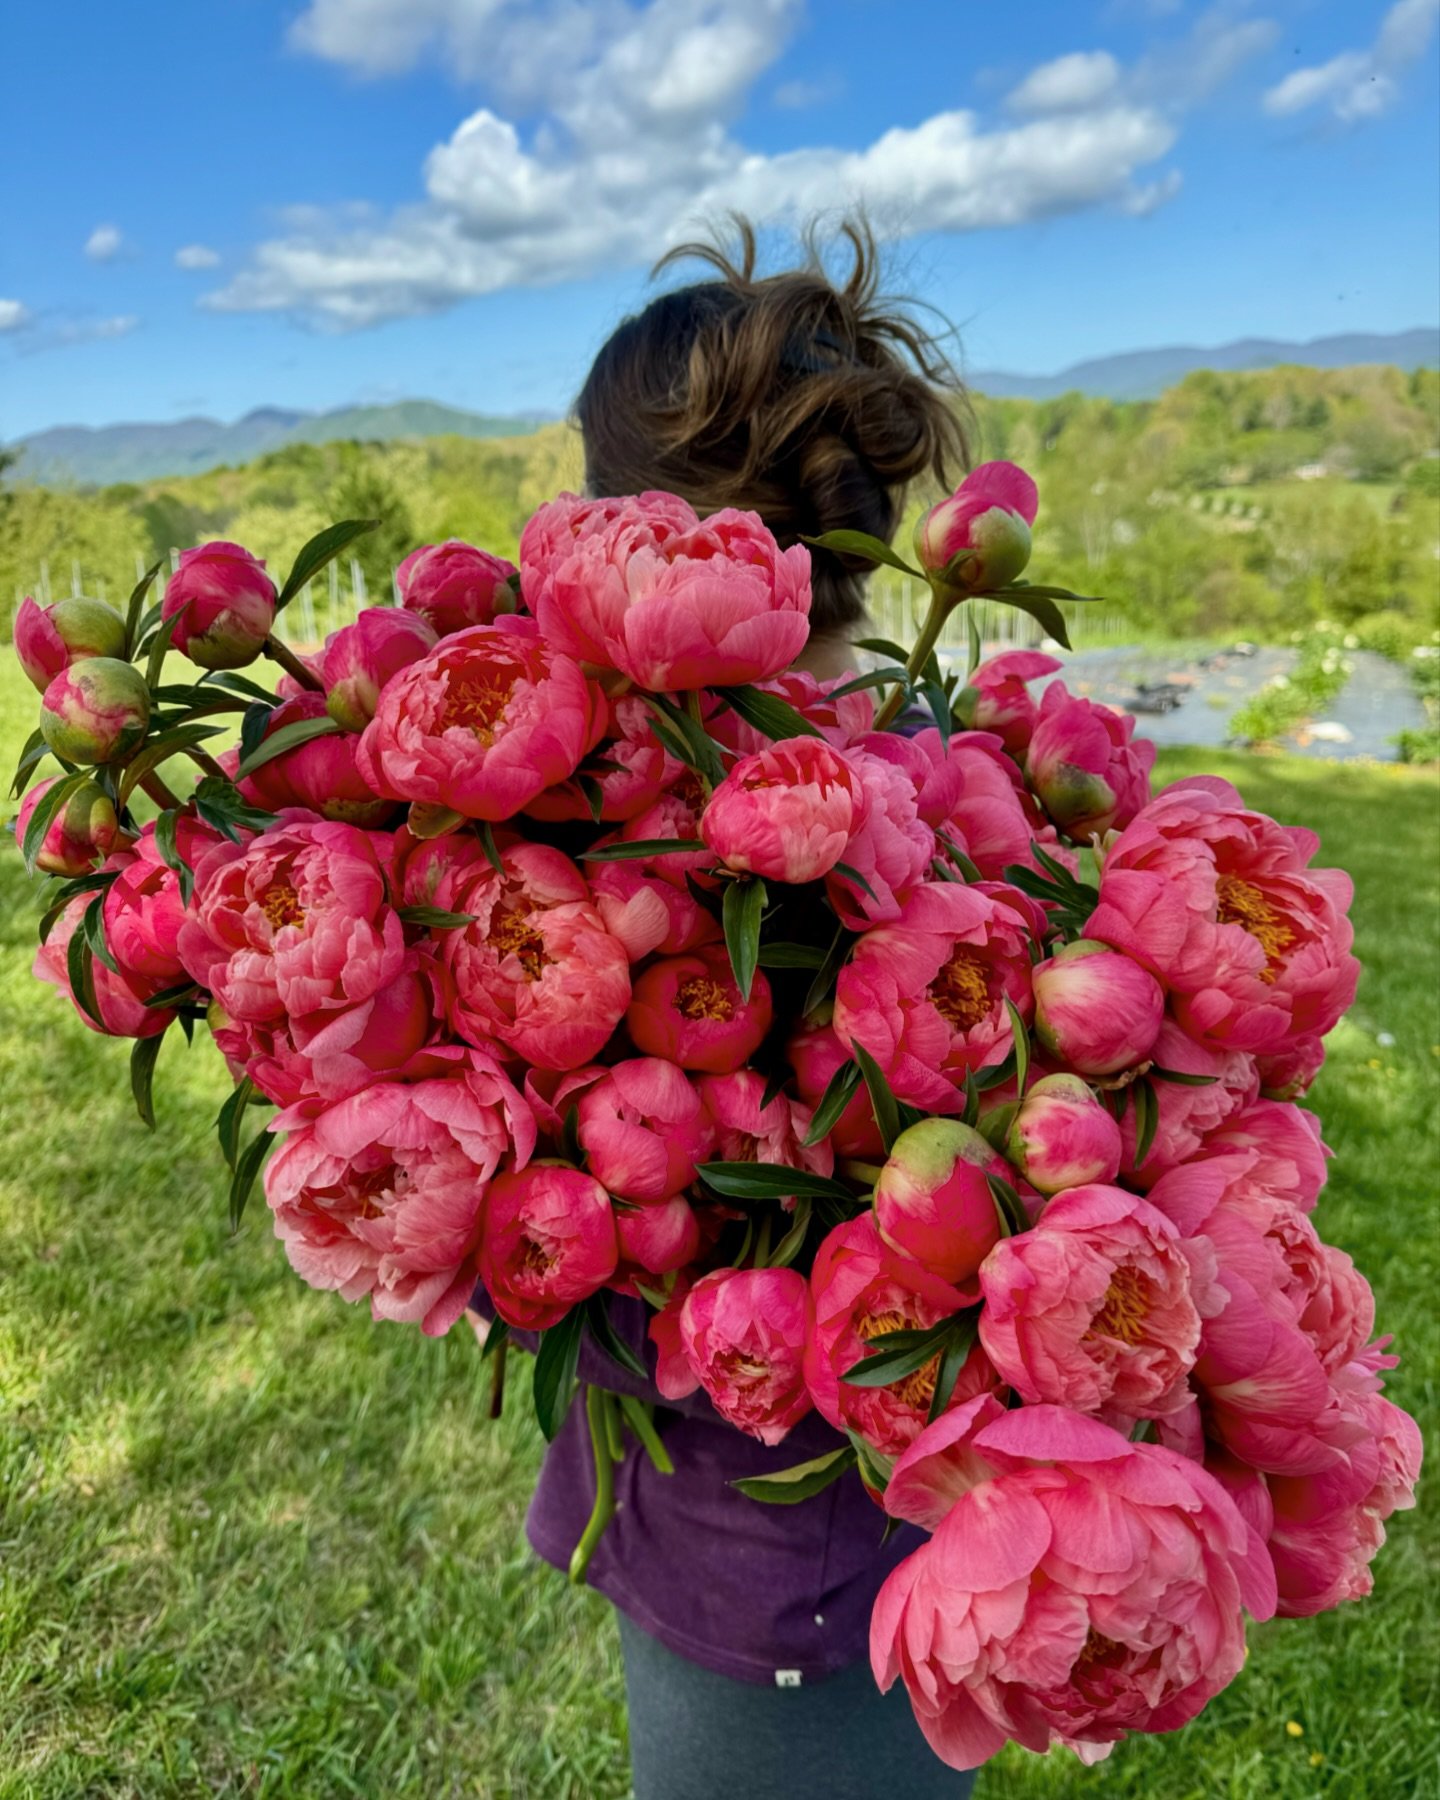 Coral charm peony season is upon us! 
My husband was looking at how insanely loaded the rest of the peonies are in the field, and told me that I had better not leave the farm anytime soon because I&rsquo;m about to have another full time job of harve